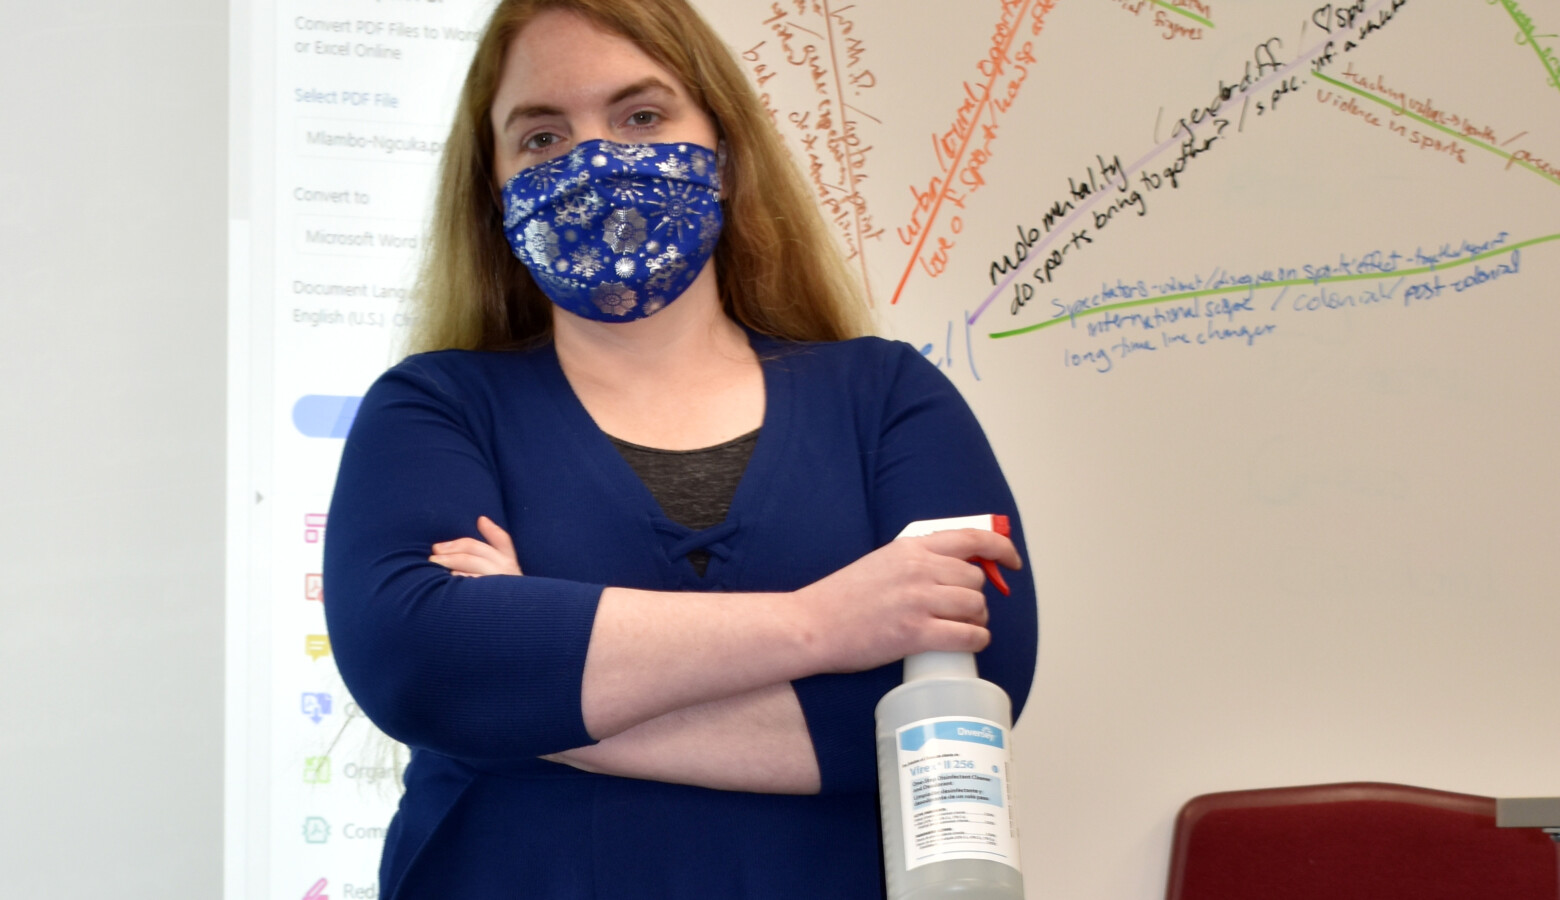 Crawfordsville High School teacher Emily Race says coming up with ideas about what can help her cope with pandemic-fueled stress feels like another task on a never-ending list of things to do. (Provided by Emily Race)